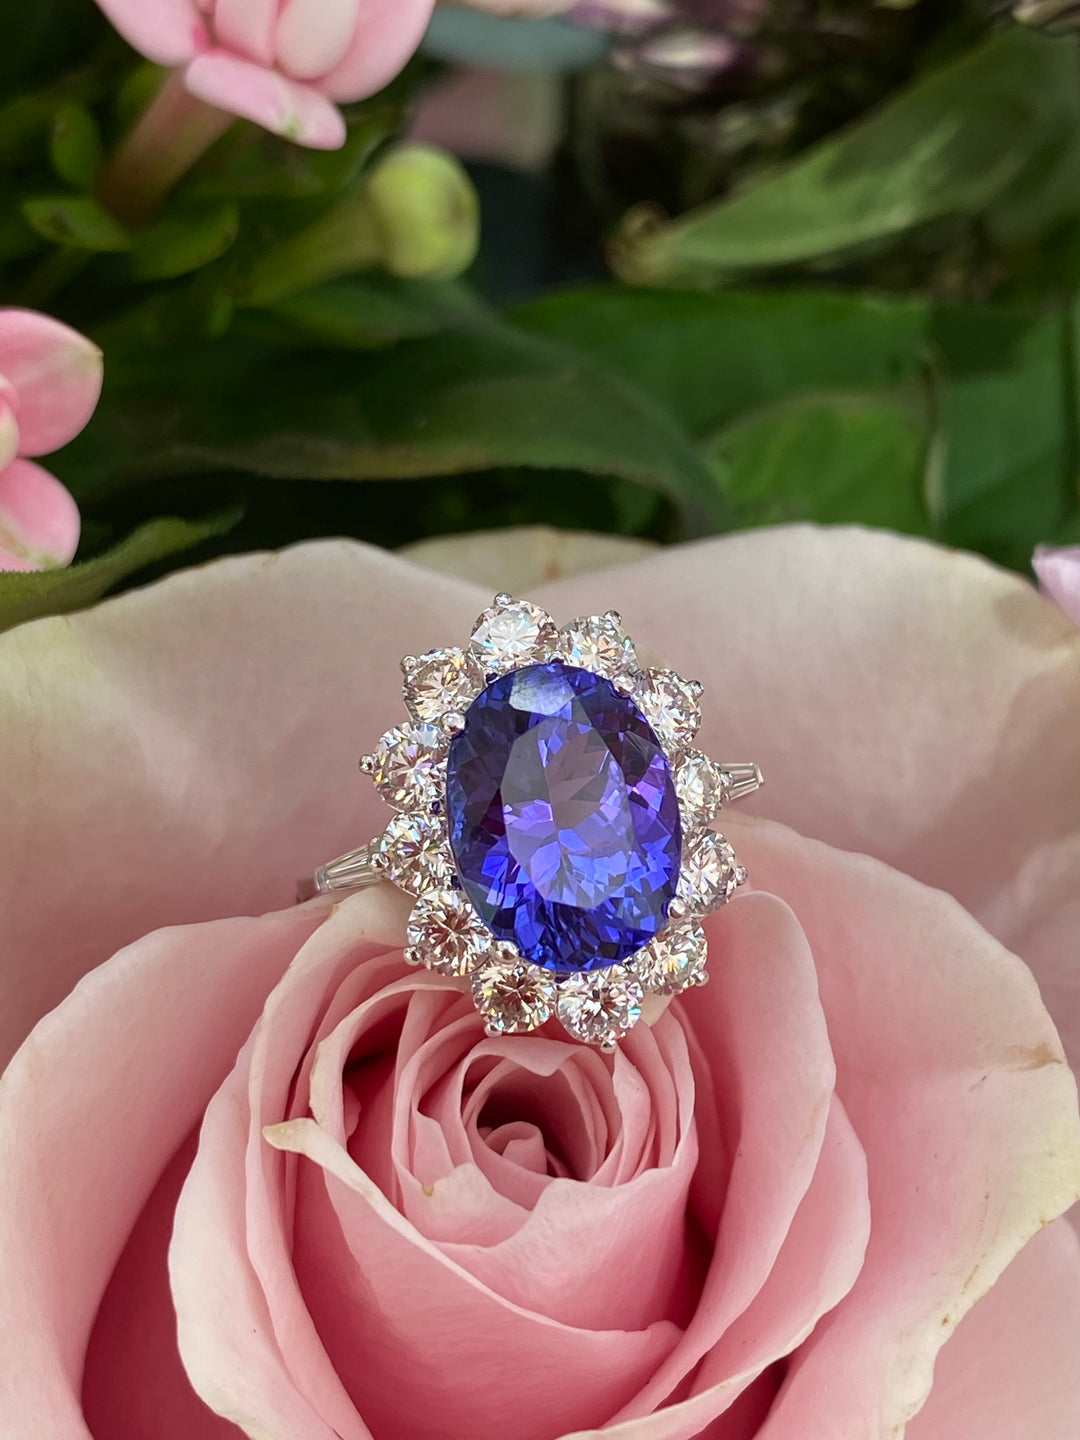 4.54 Carat Oval-Cut Tanzanite and Diamond Ring in 18ct White Gold